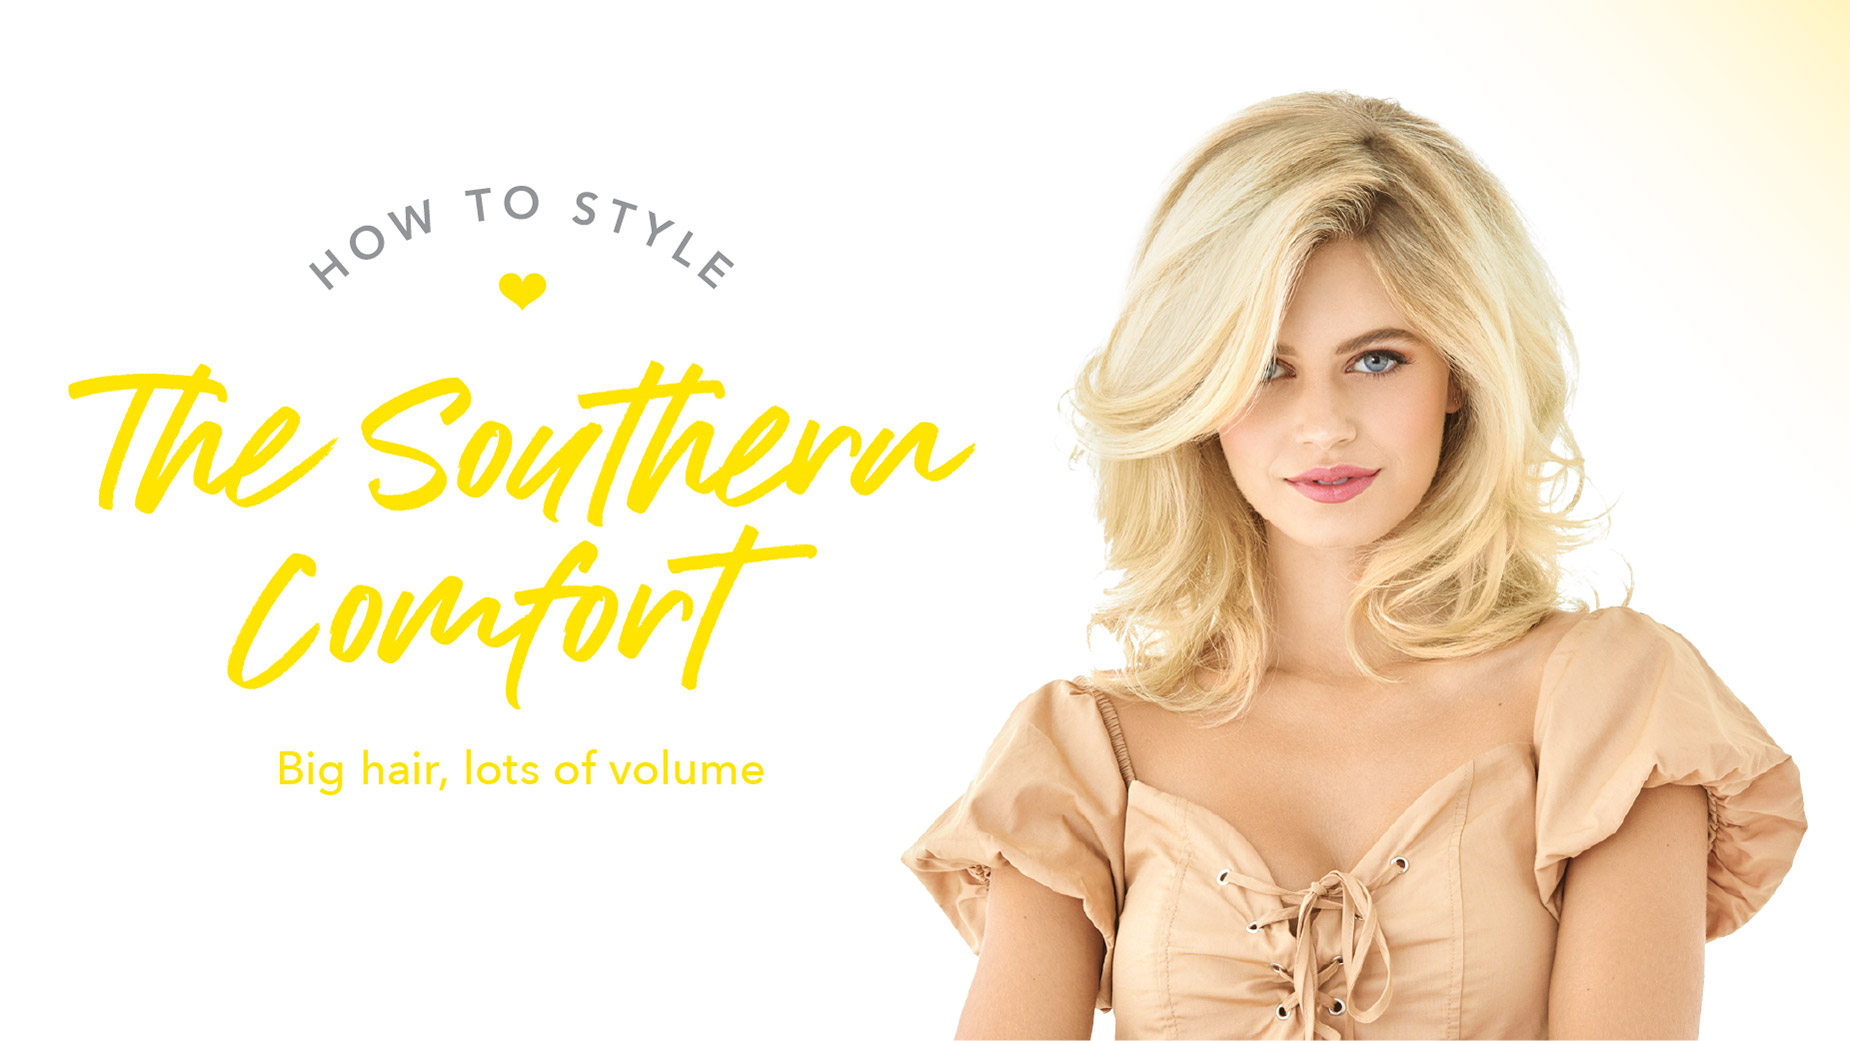 Drybar Signature Styles From Home: The Southern Comfort Video